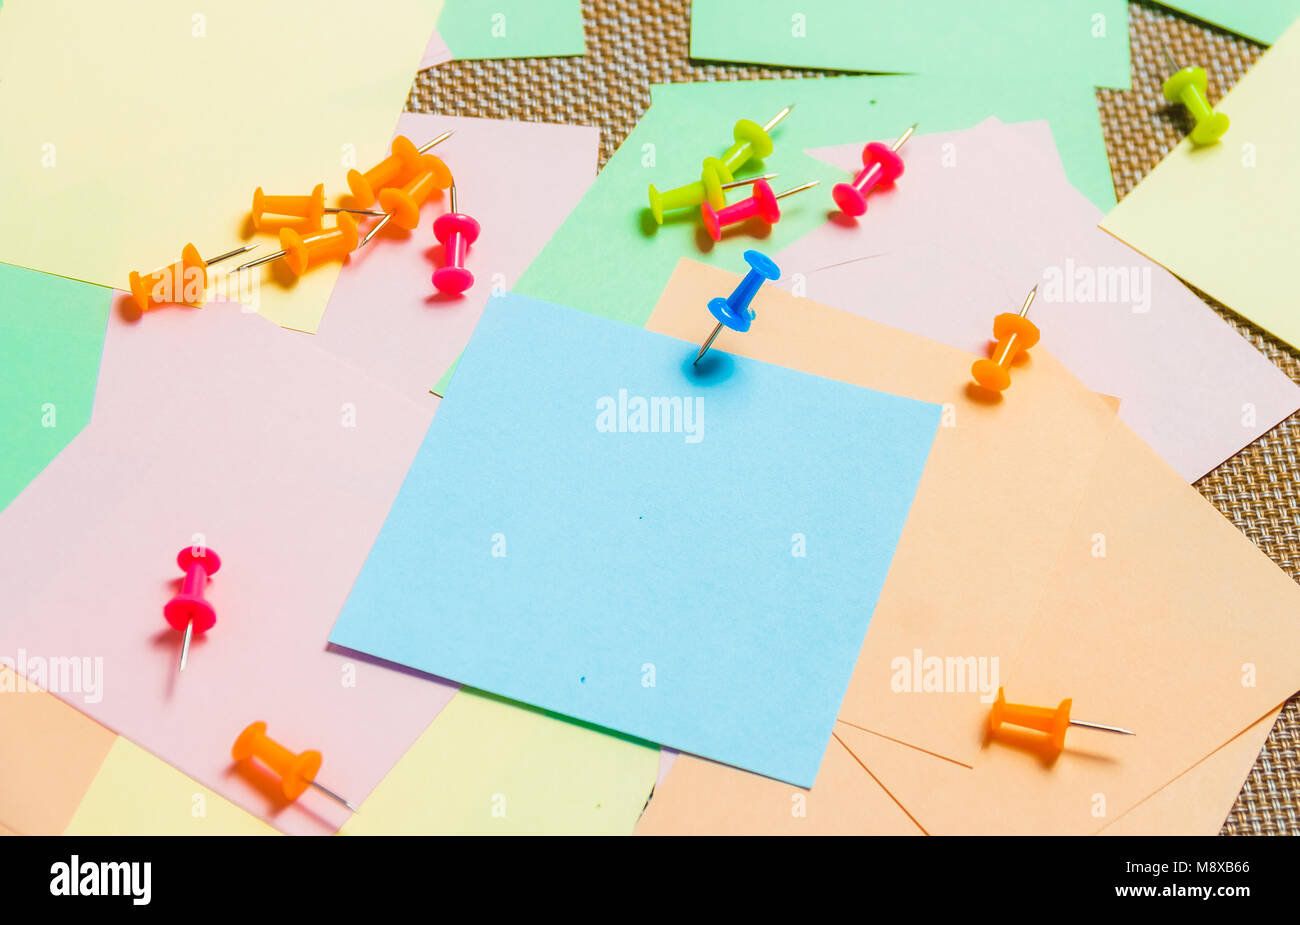 Stationary, Pushpins Heap on Blank Colored Sticker. Time-management, Planning Stock Photo